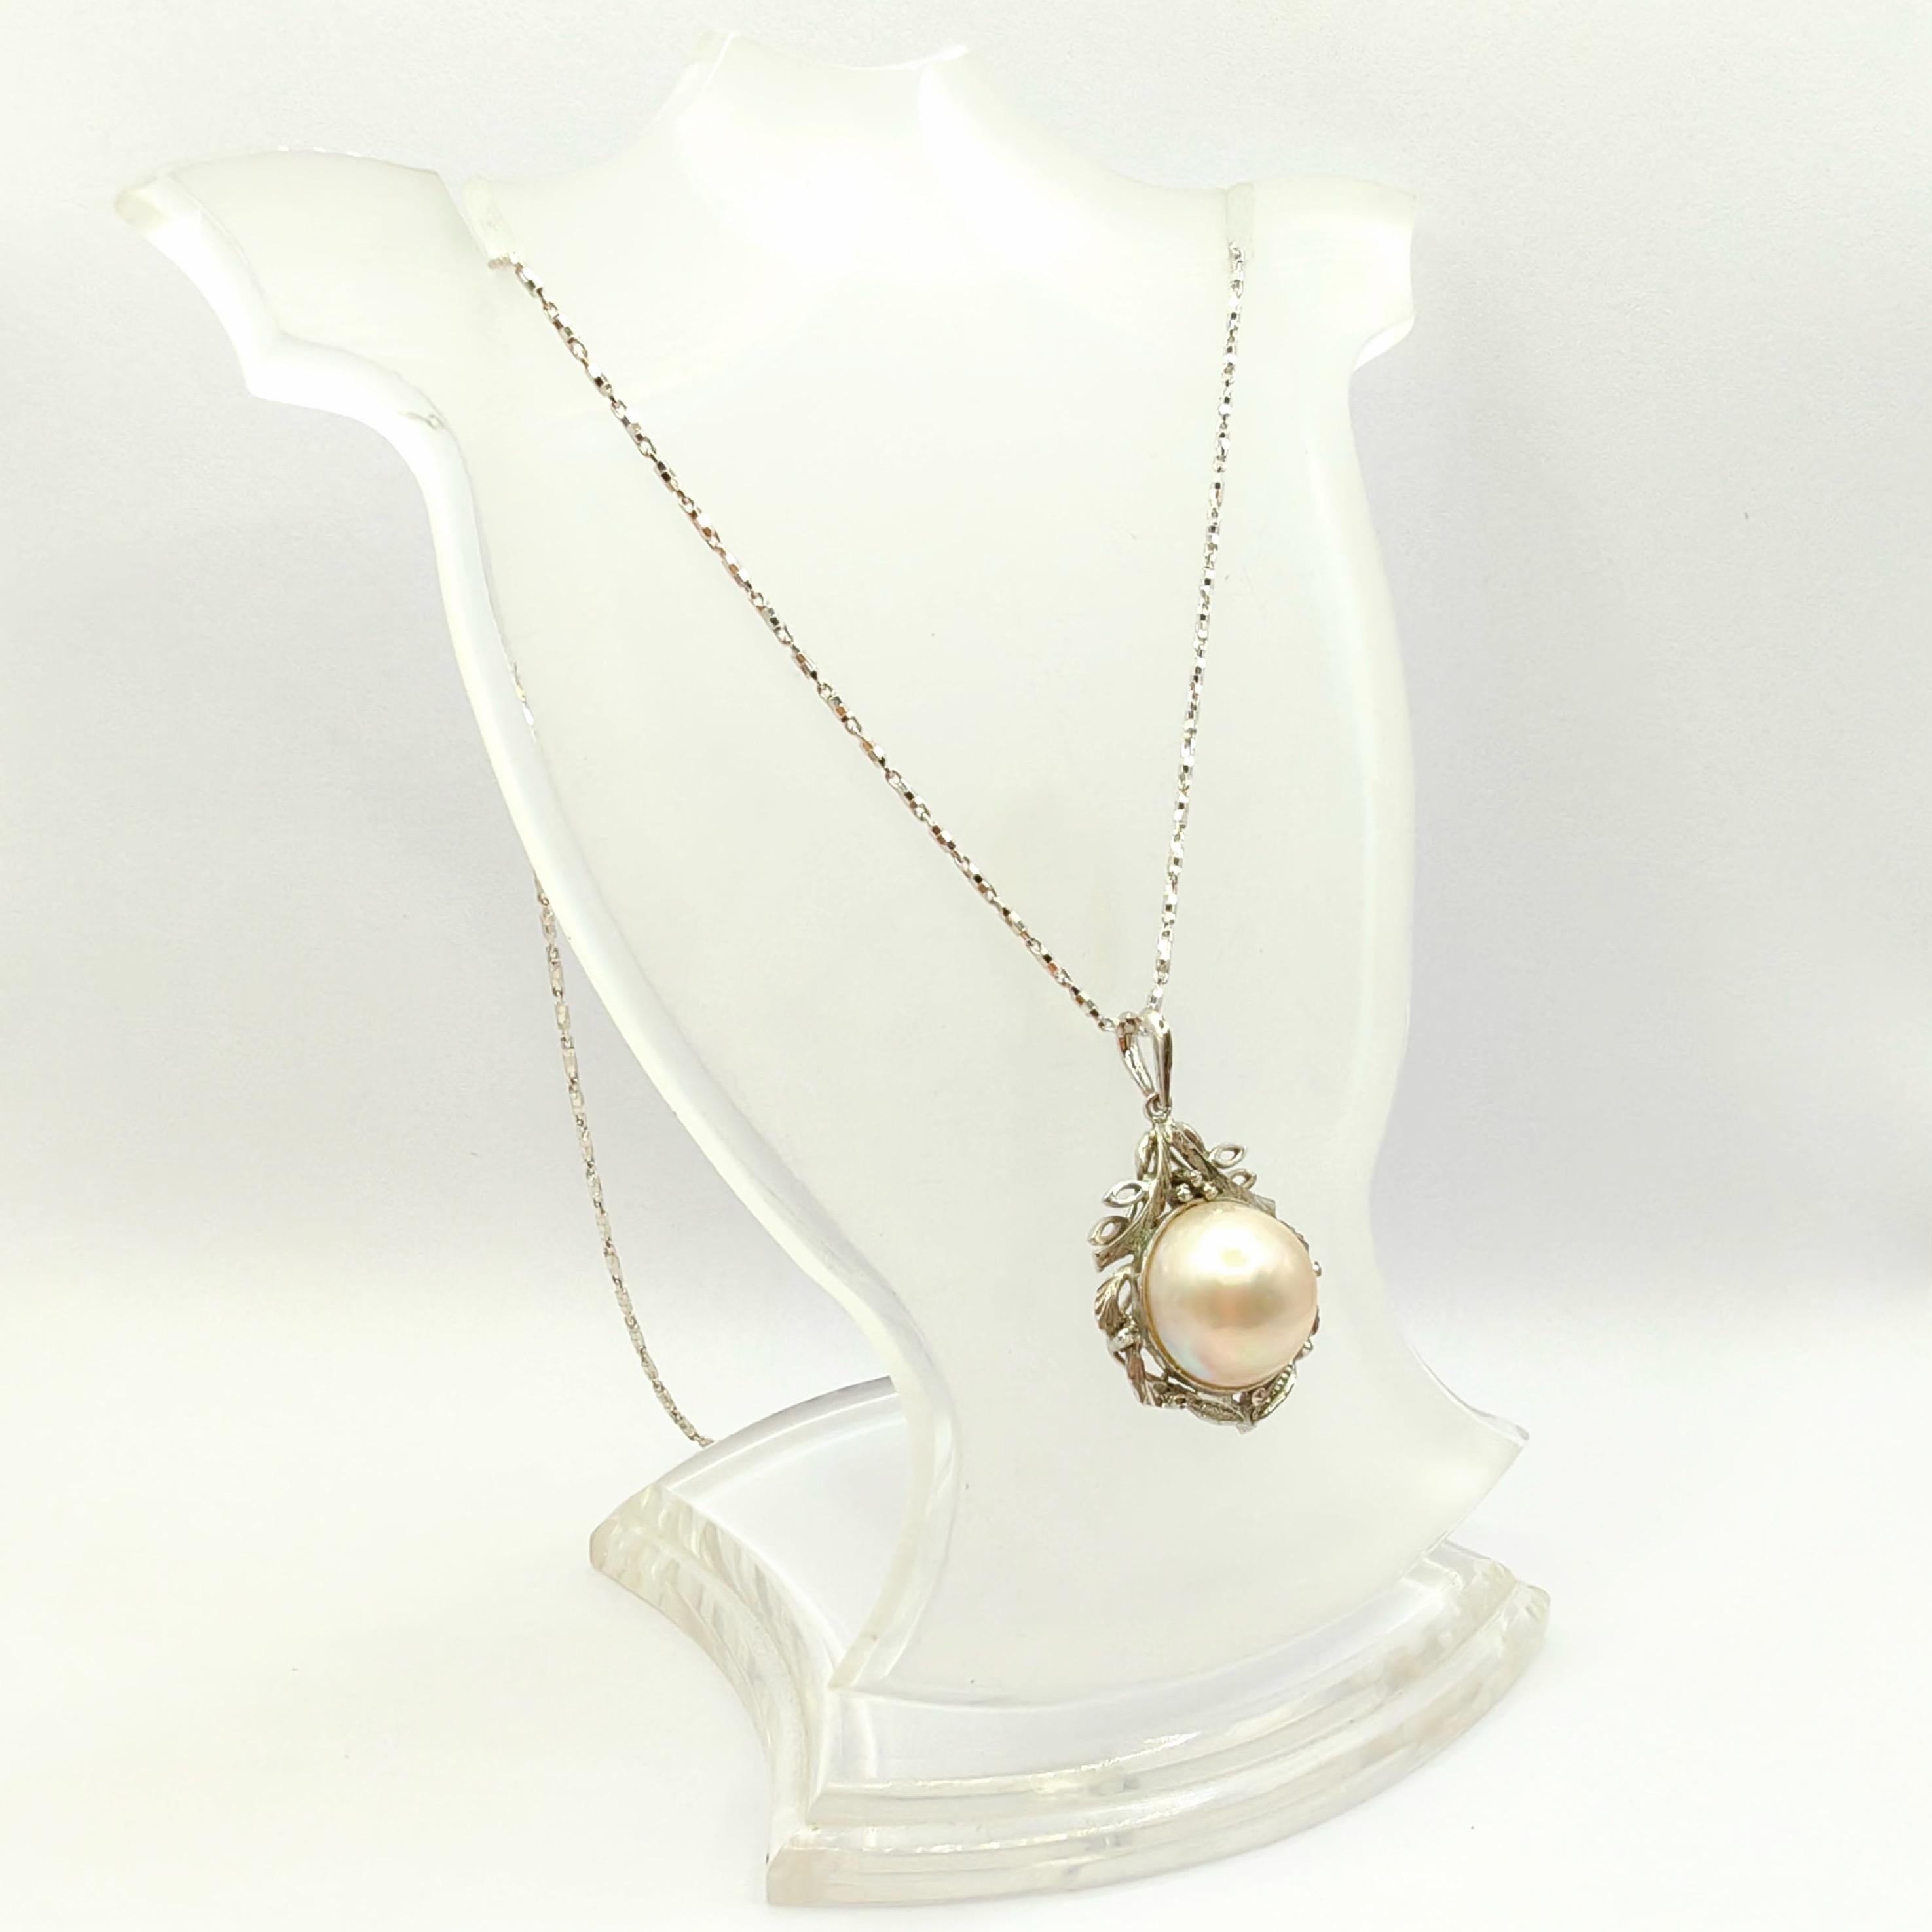 Vintage Baroque Style 14mm Mabé Pearl Necklace Pendant in Sterling Silver For Sale 3